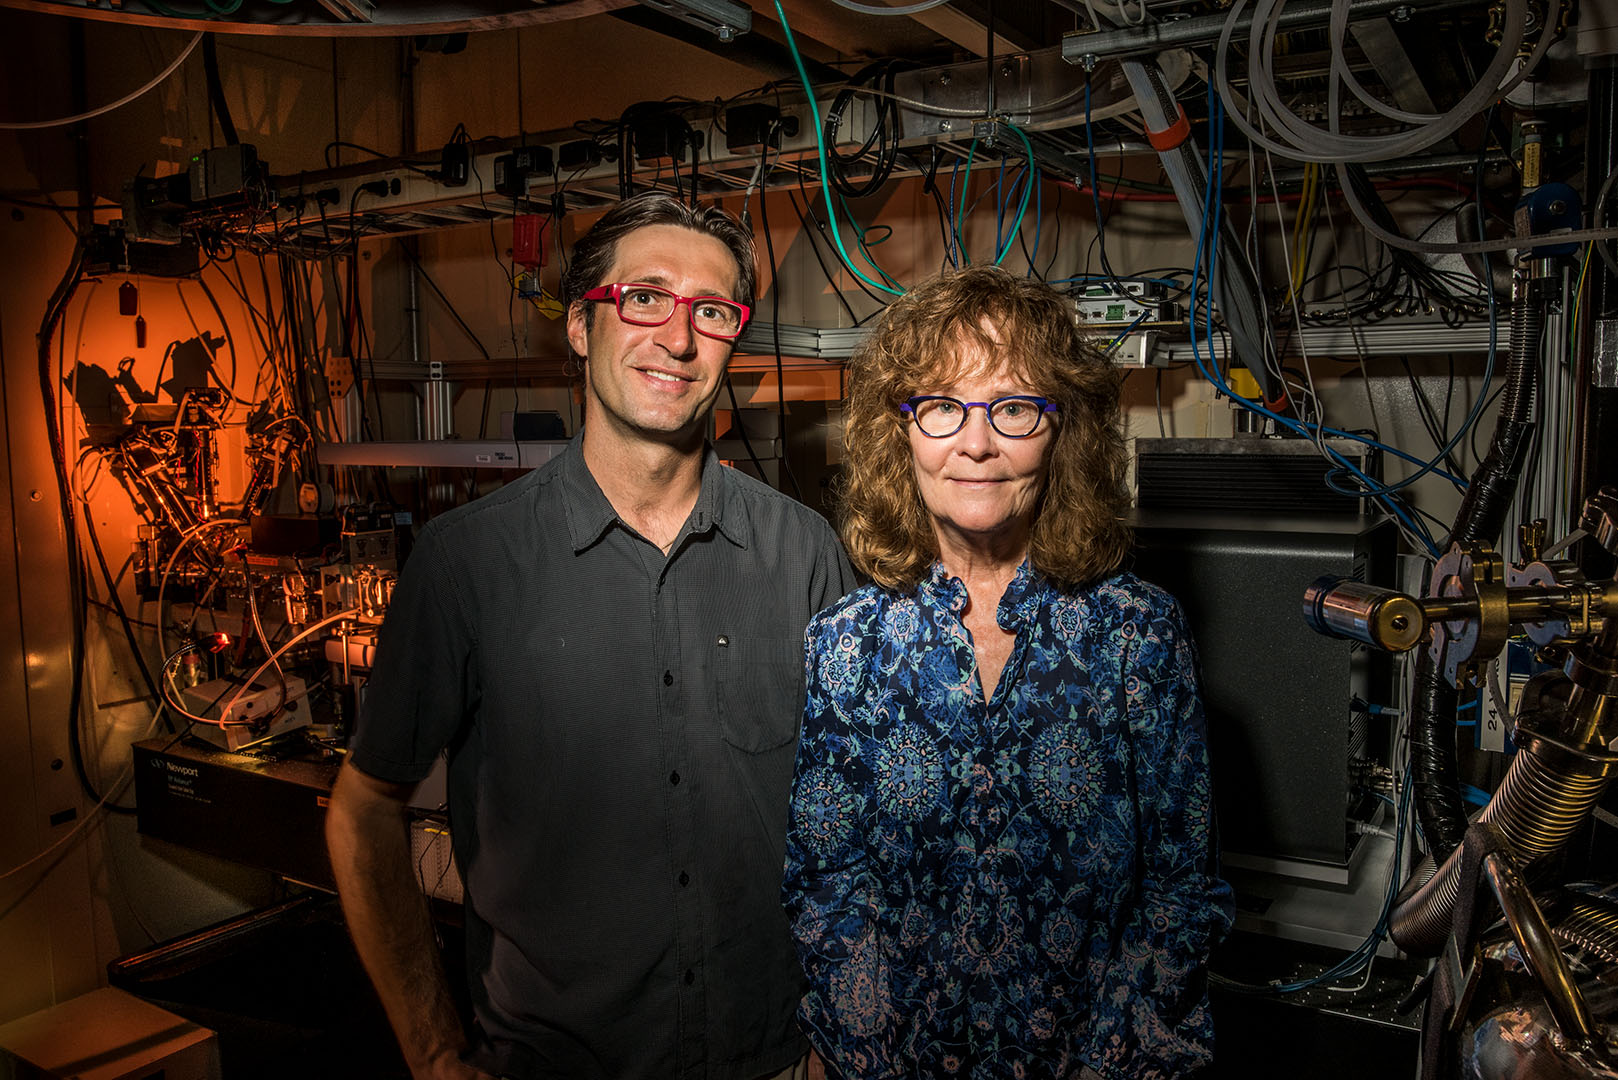 Two scientists posing in front of a dark, wire-filled lab.